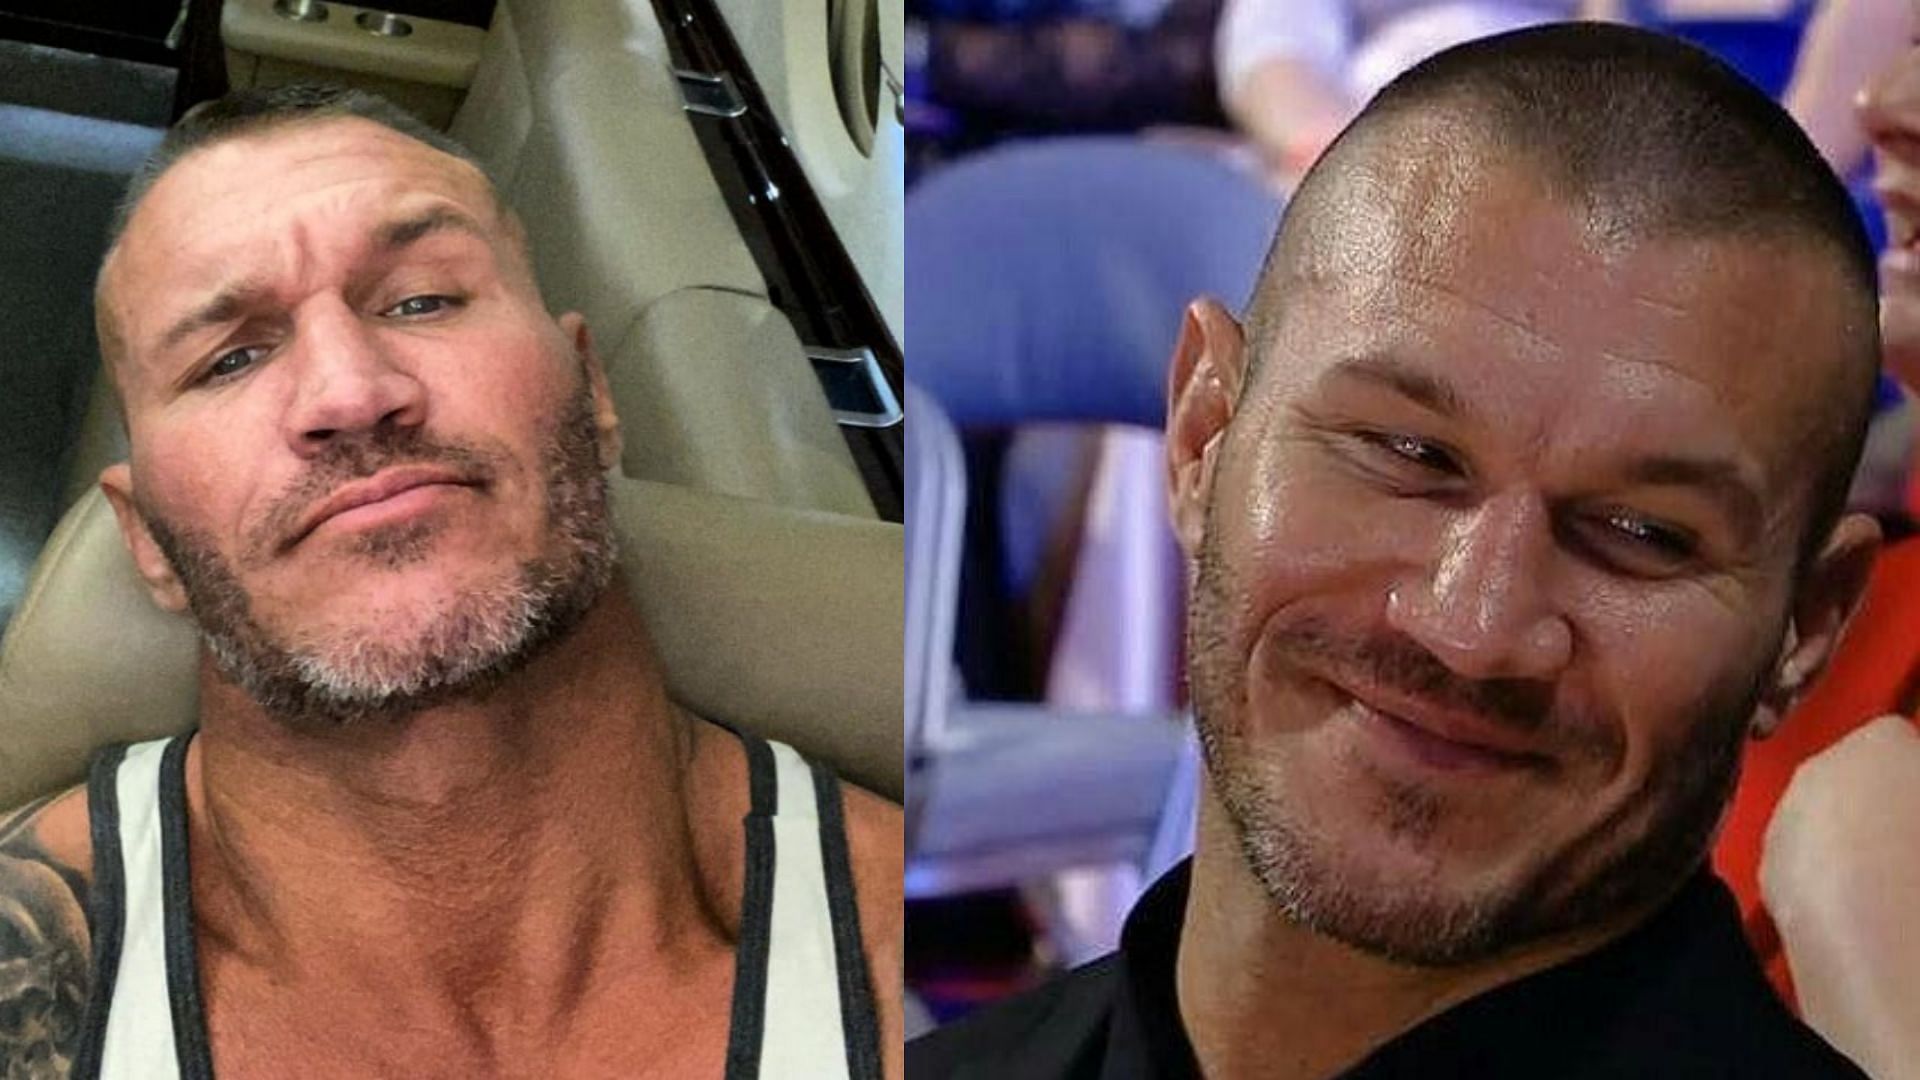 Randy Orton has been gone from WWE for more than a year